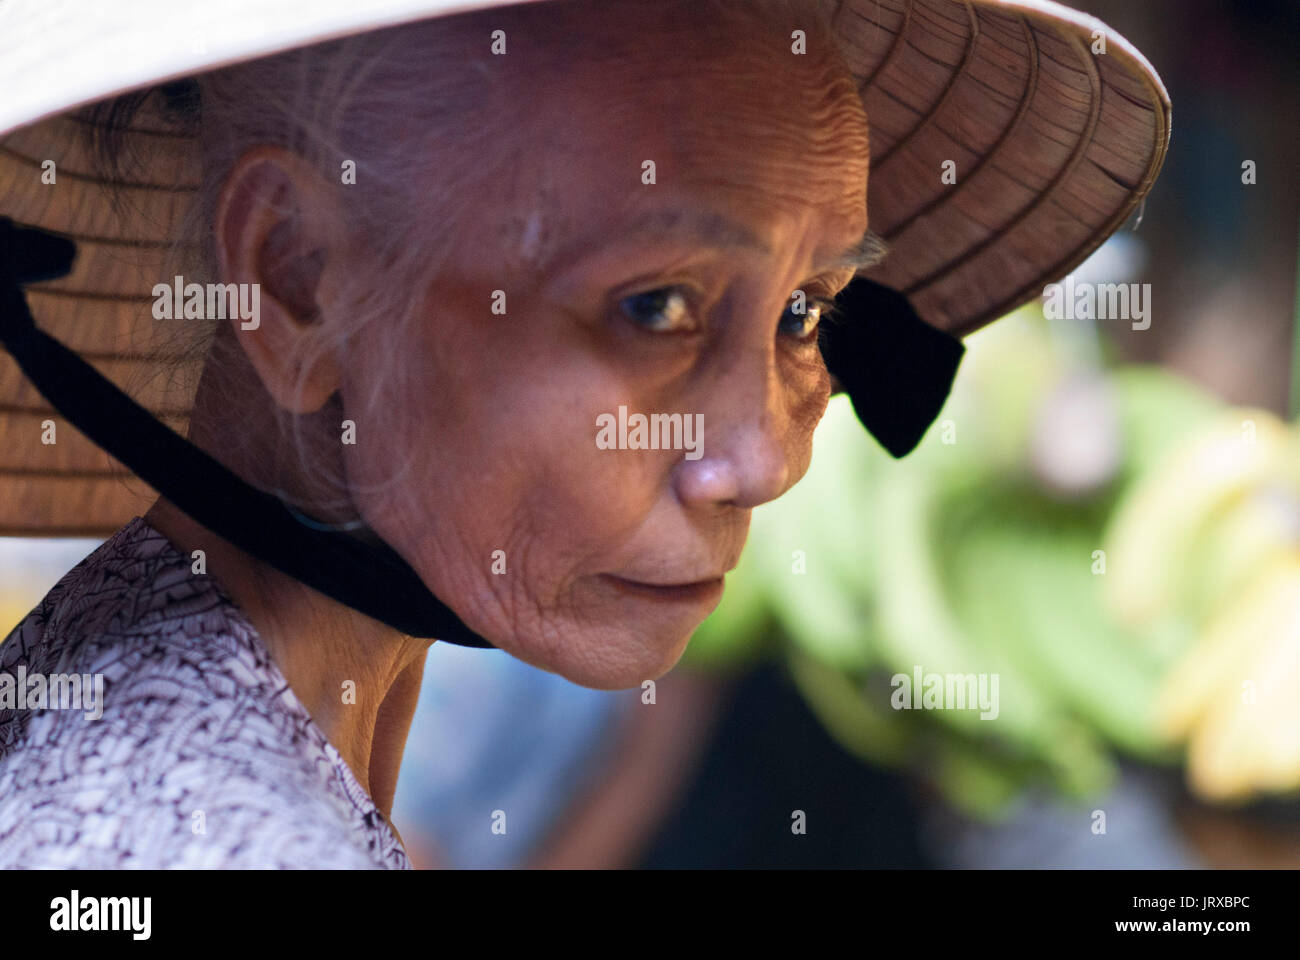 Woman wearing traditional hat, Hoi An, Vietnam Stock Photo